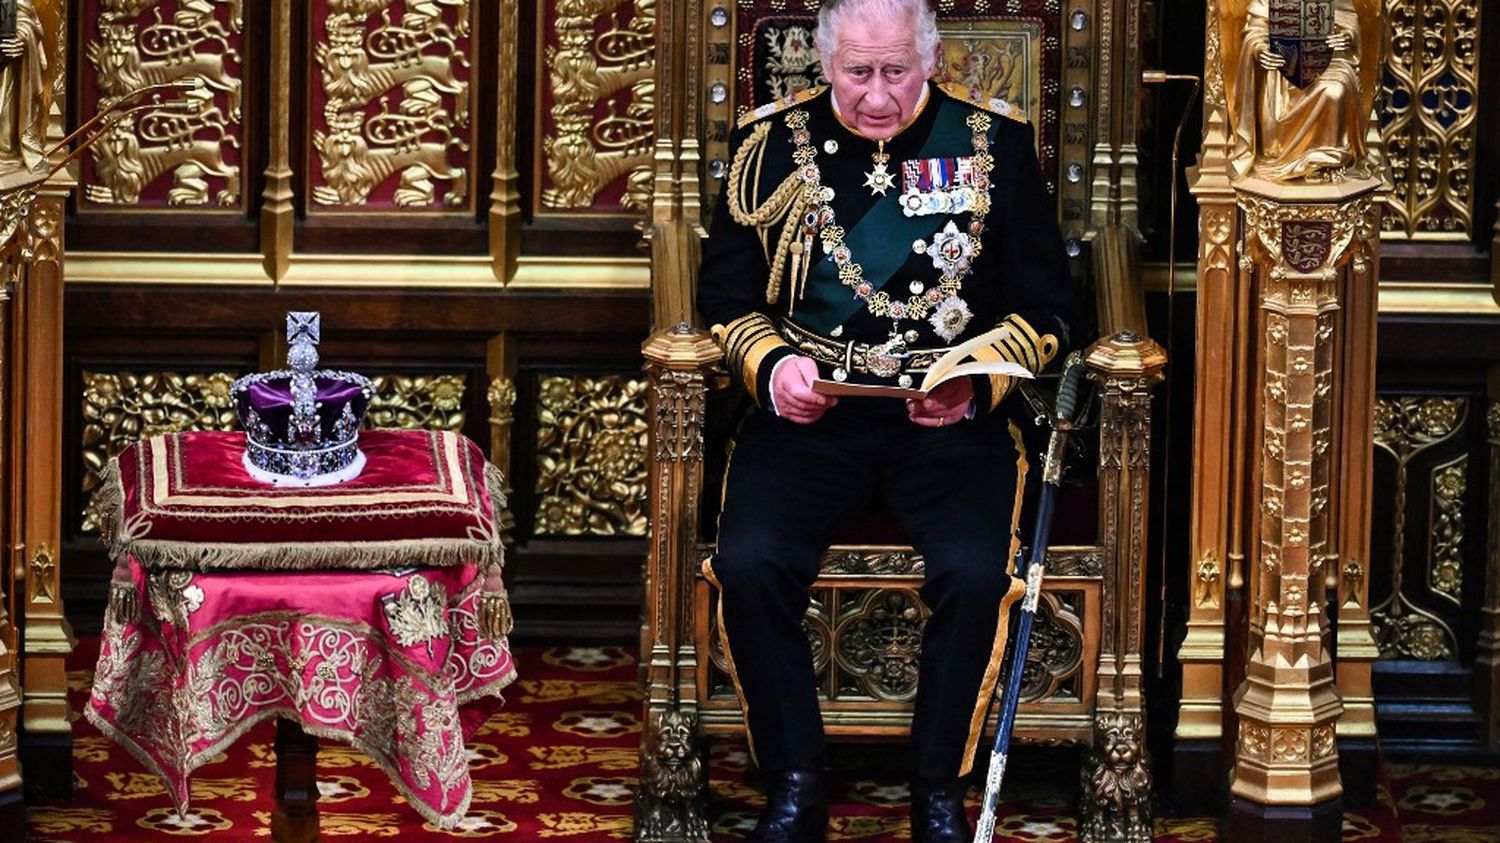 United Kingdom: Prince Charles solemn and diligent for his first throne speech
